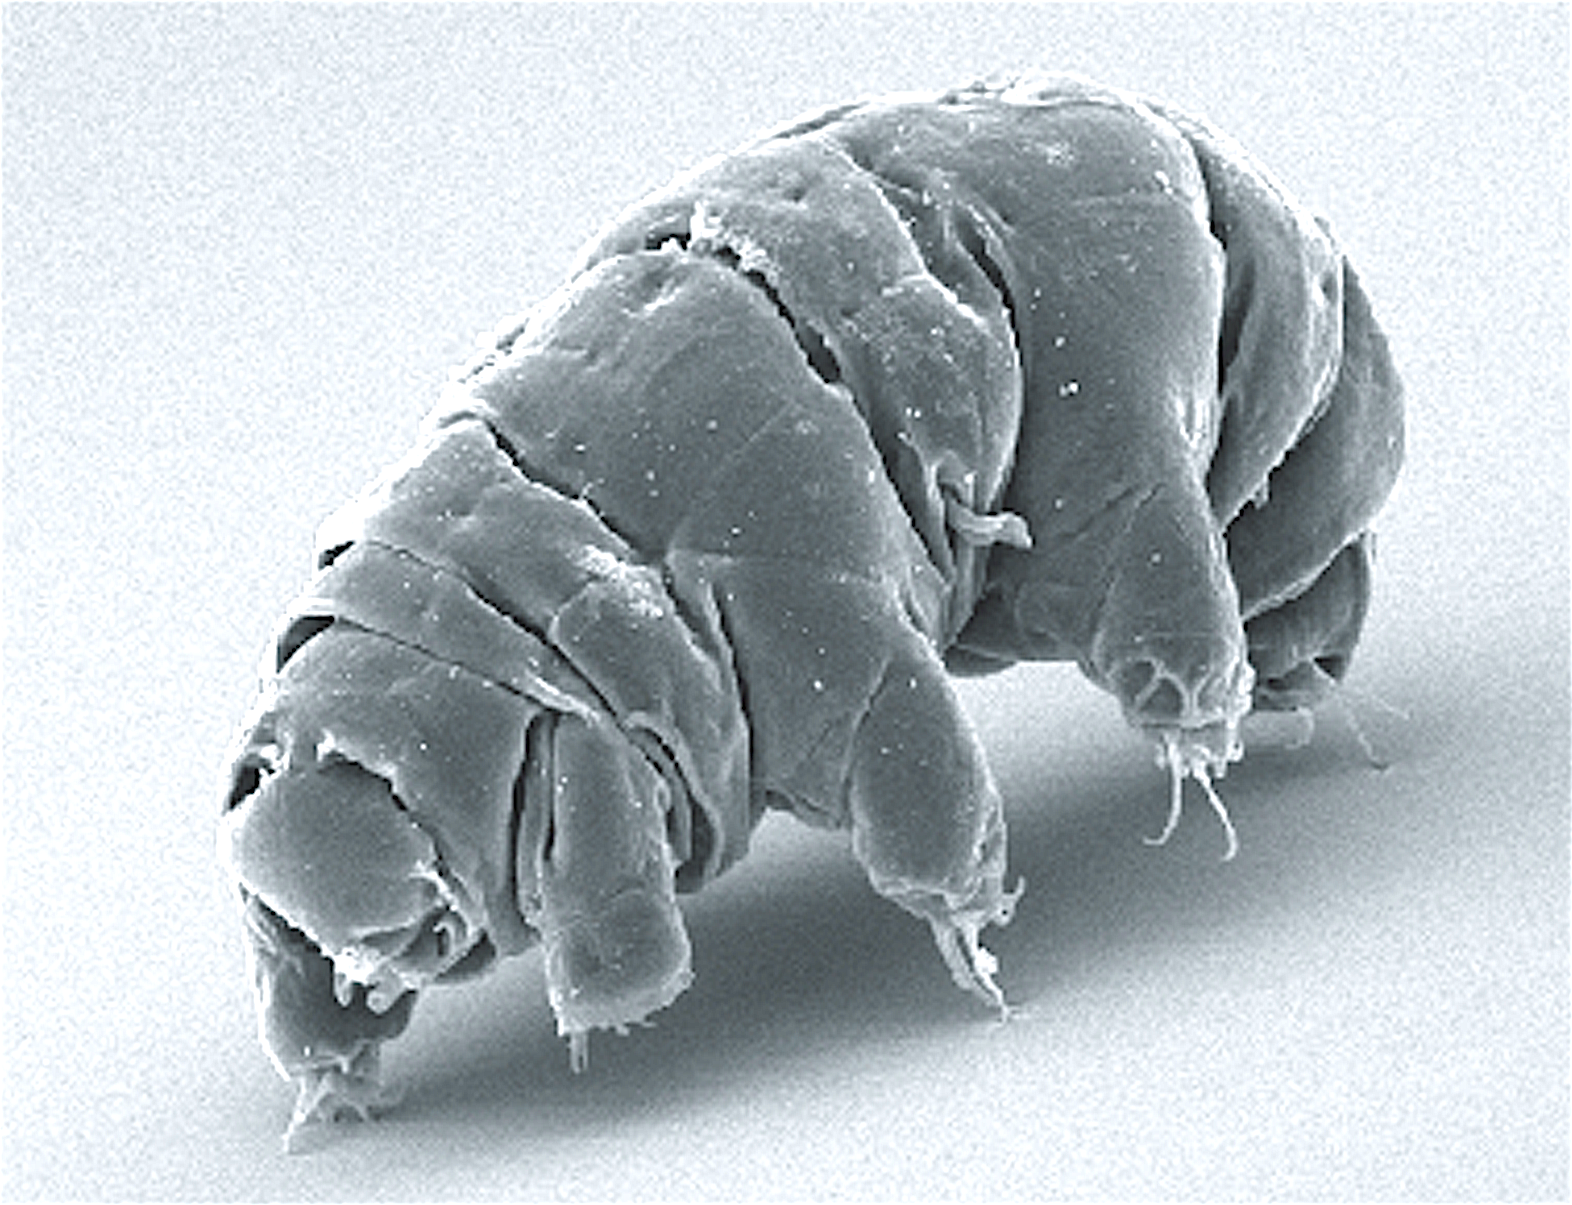 A scanning electron microscope image of a water bear.